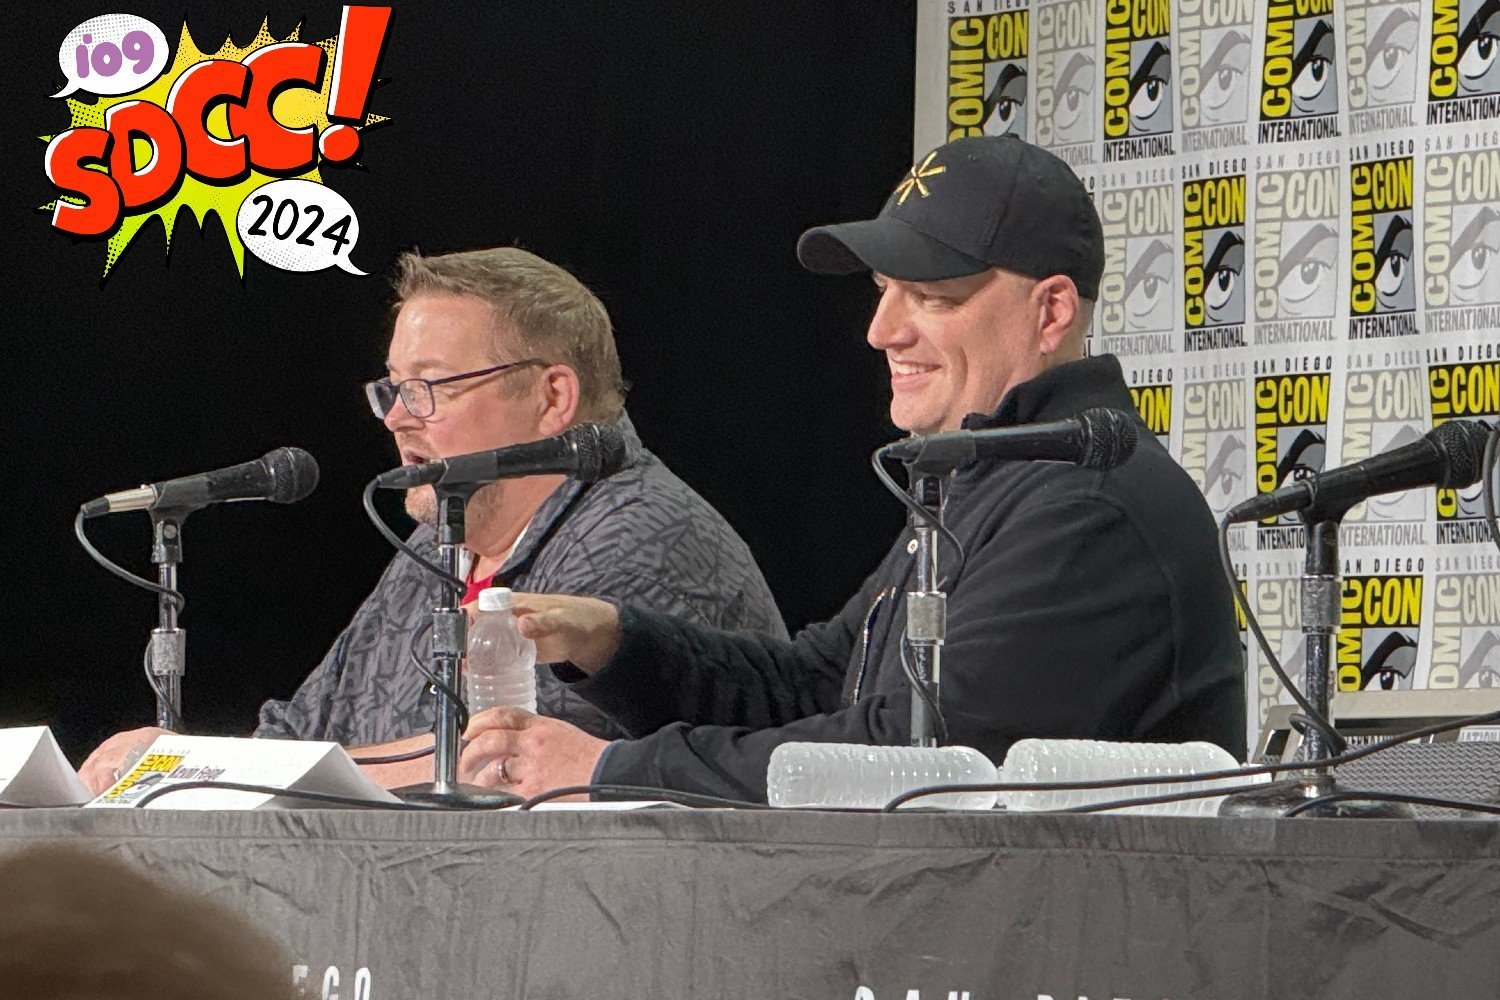 Kevin Feige Told His Marvel and Geek Origin Story at Comic-Con 2024